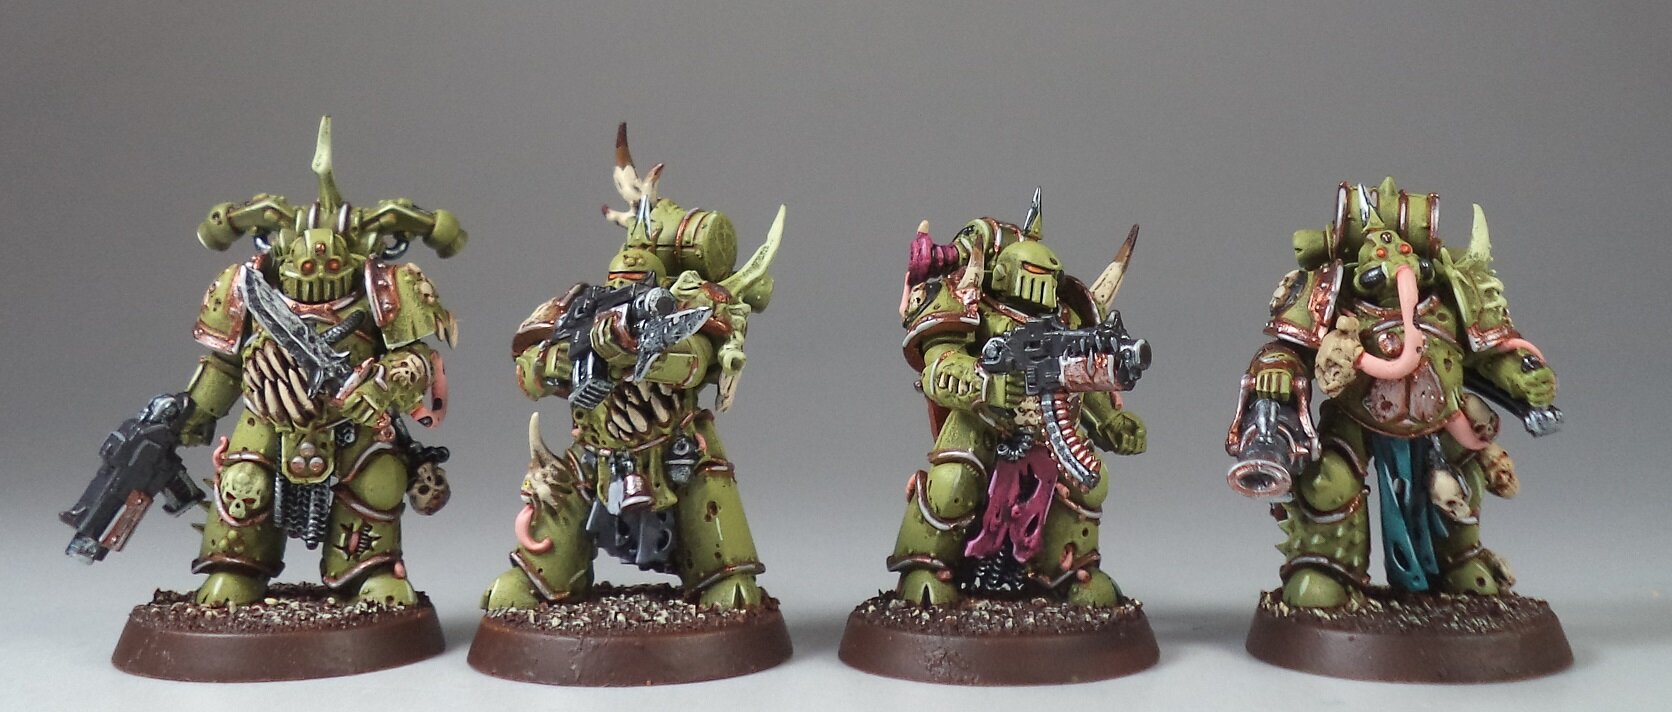 40k miniature painting service gaming painting painting commissions deathguard nurgle (6).JPG